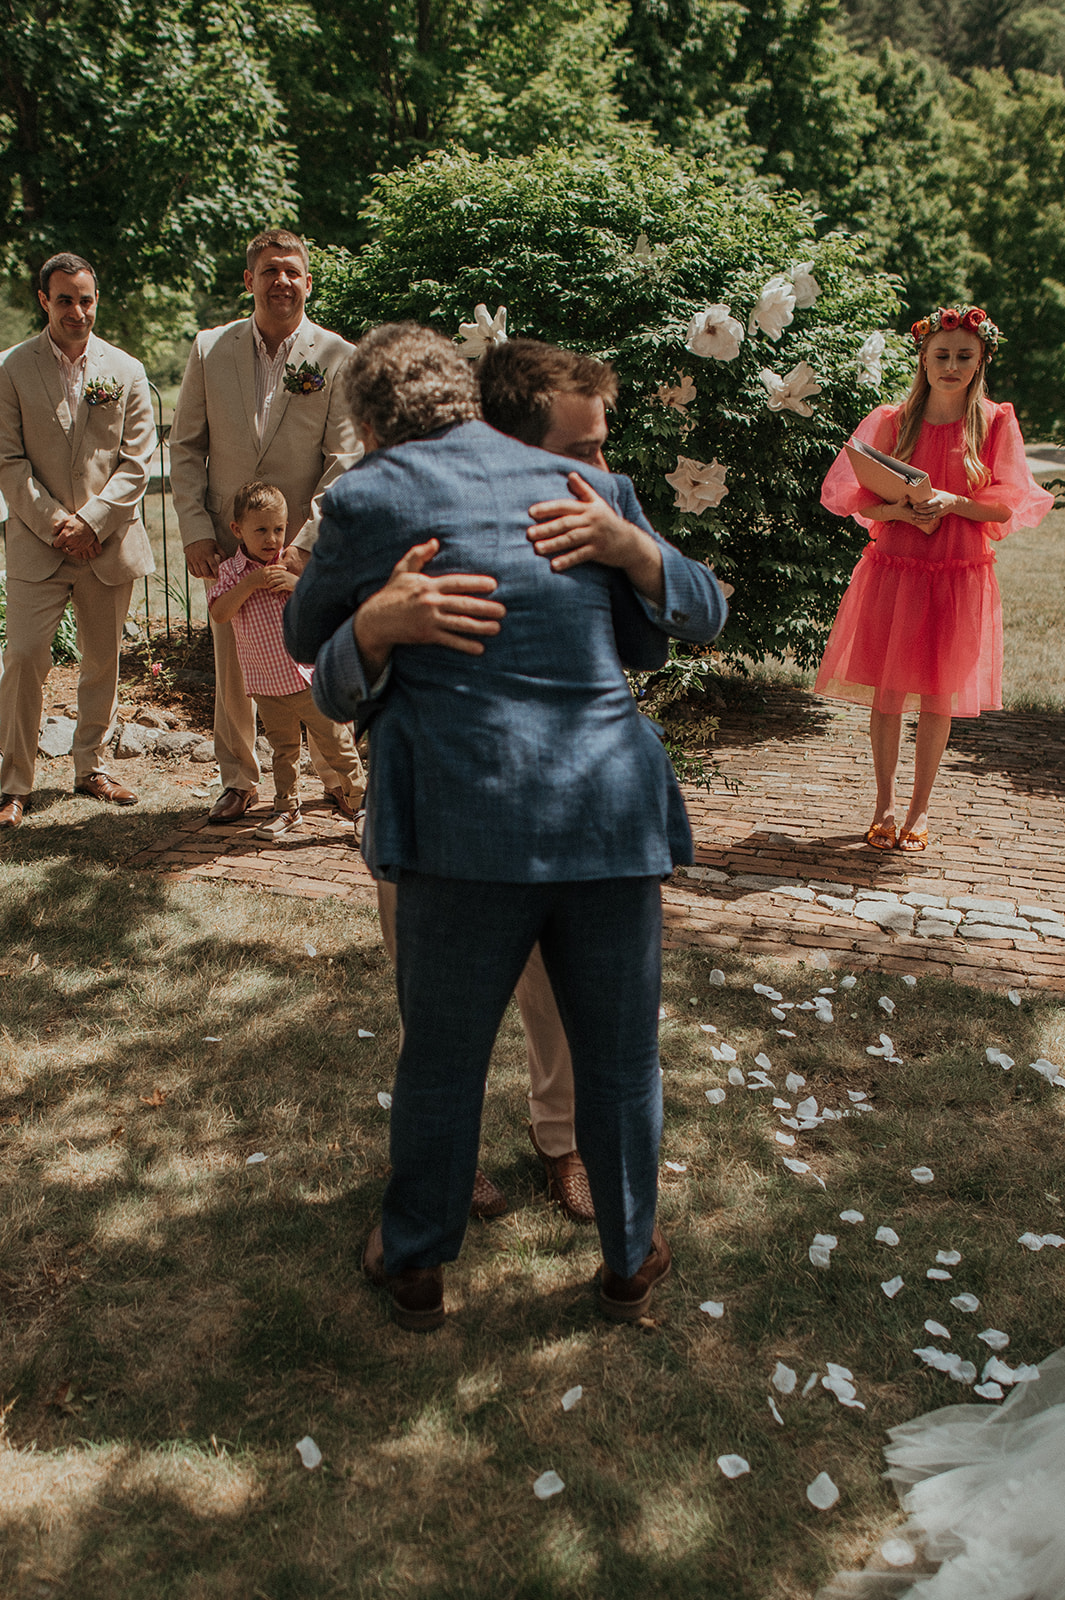 Groom embraces father of the bride during ceremony